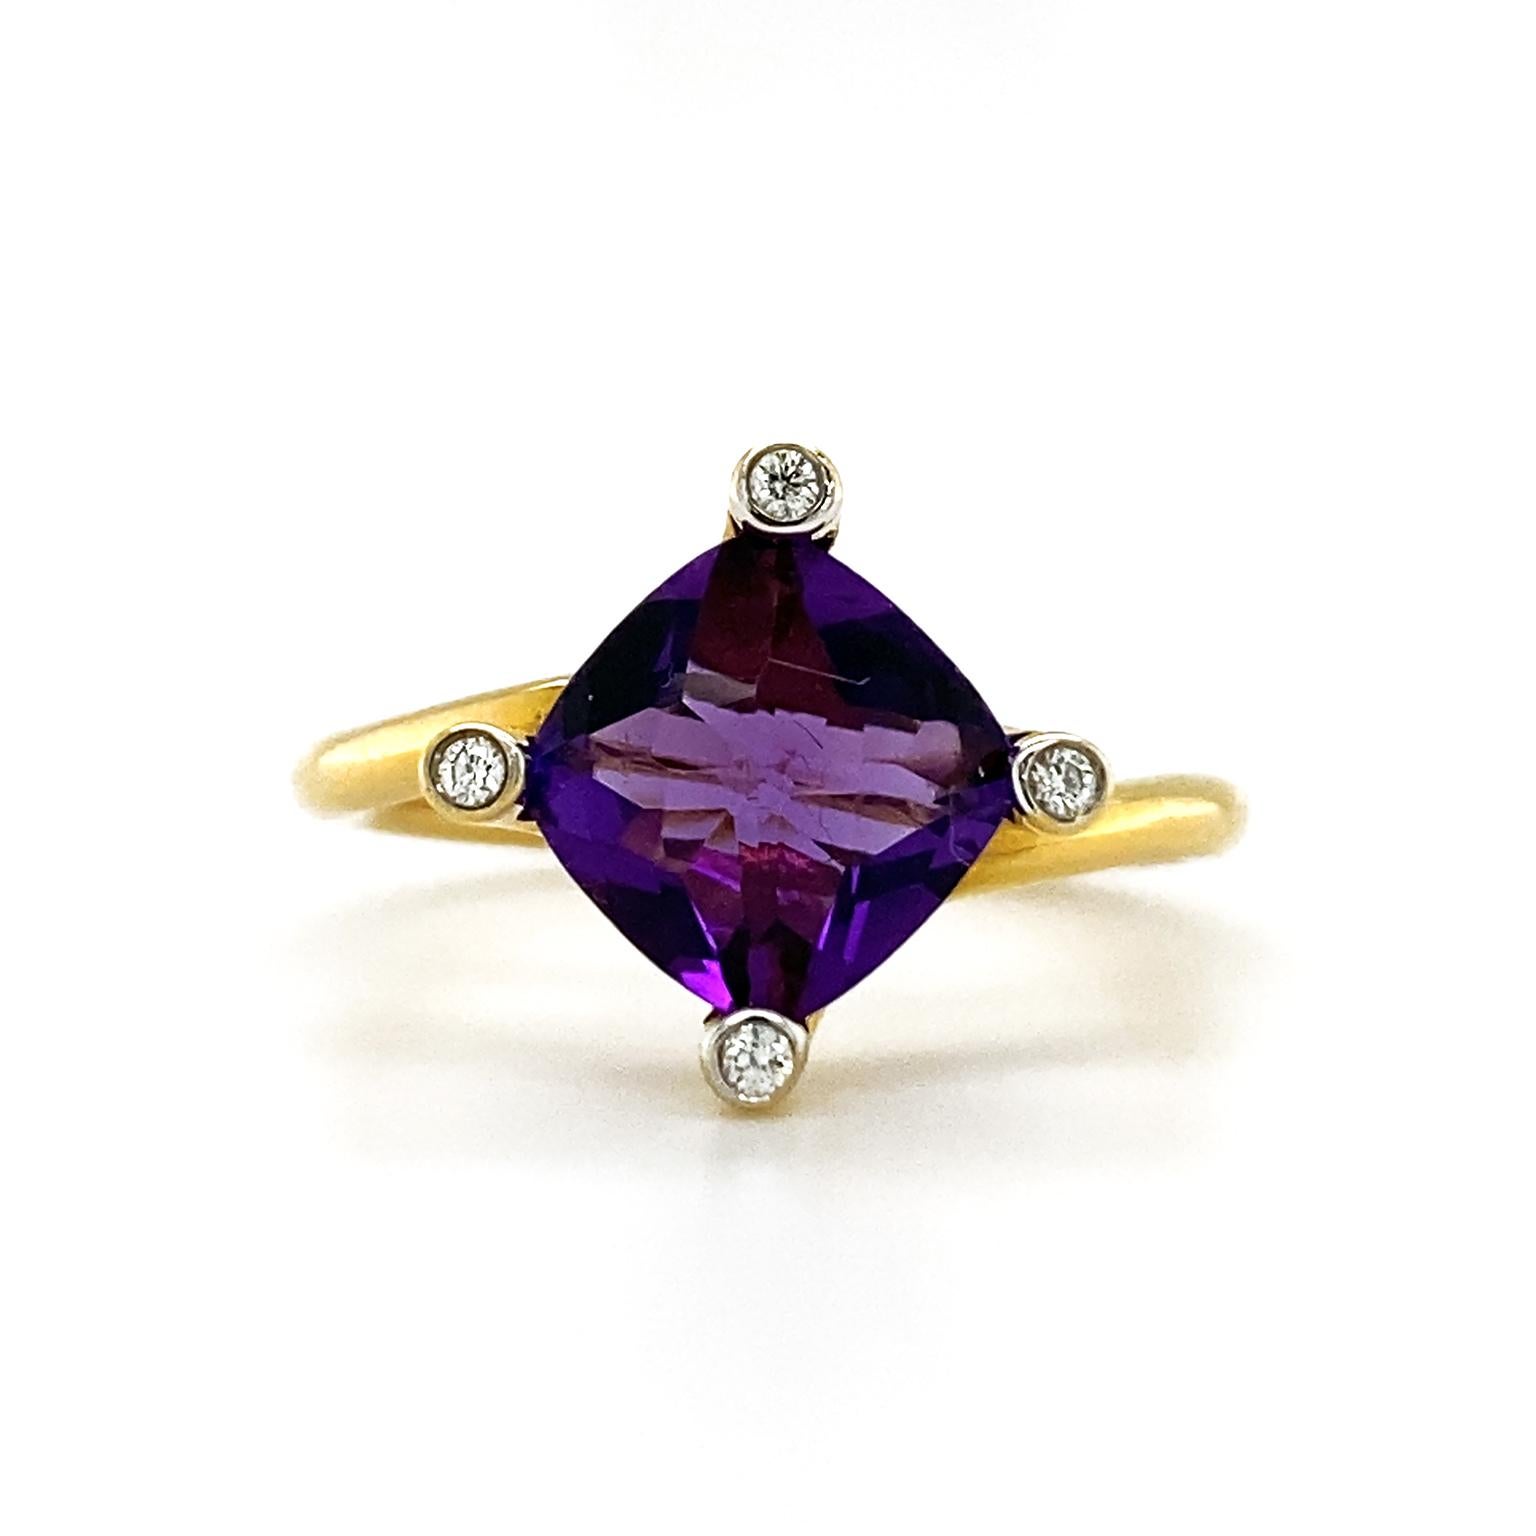 A lustrous cushion cut amethyst is heightened with four bezel set brilliant cut diamonds on each corner. An 18k yellow gold band is oblique as the finishing touch. The weight of the amethyst is 1.84 carats and the diamonds weigh a total of .04